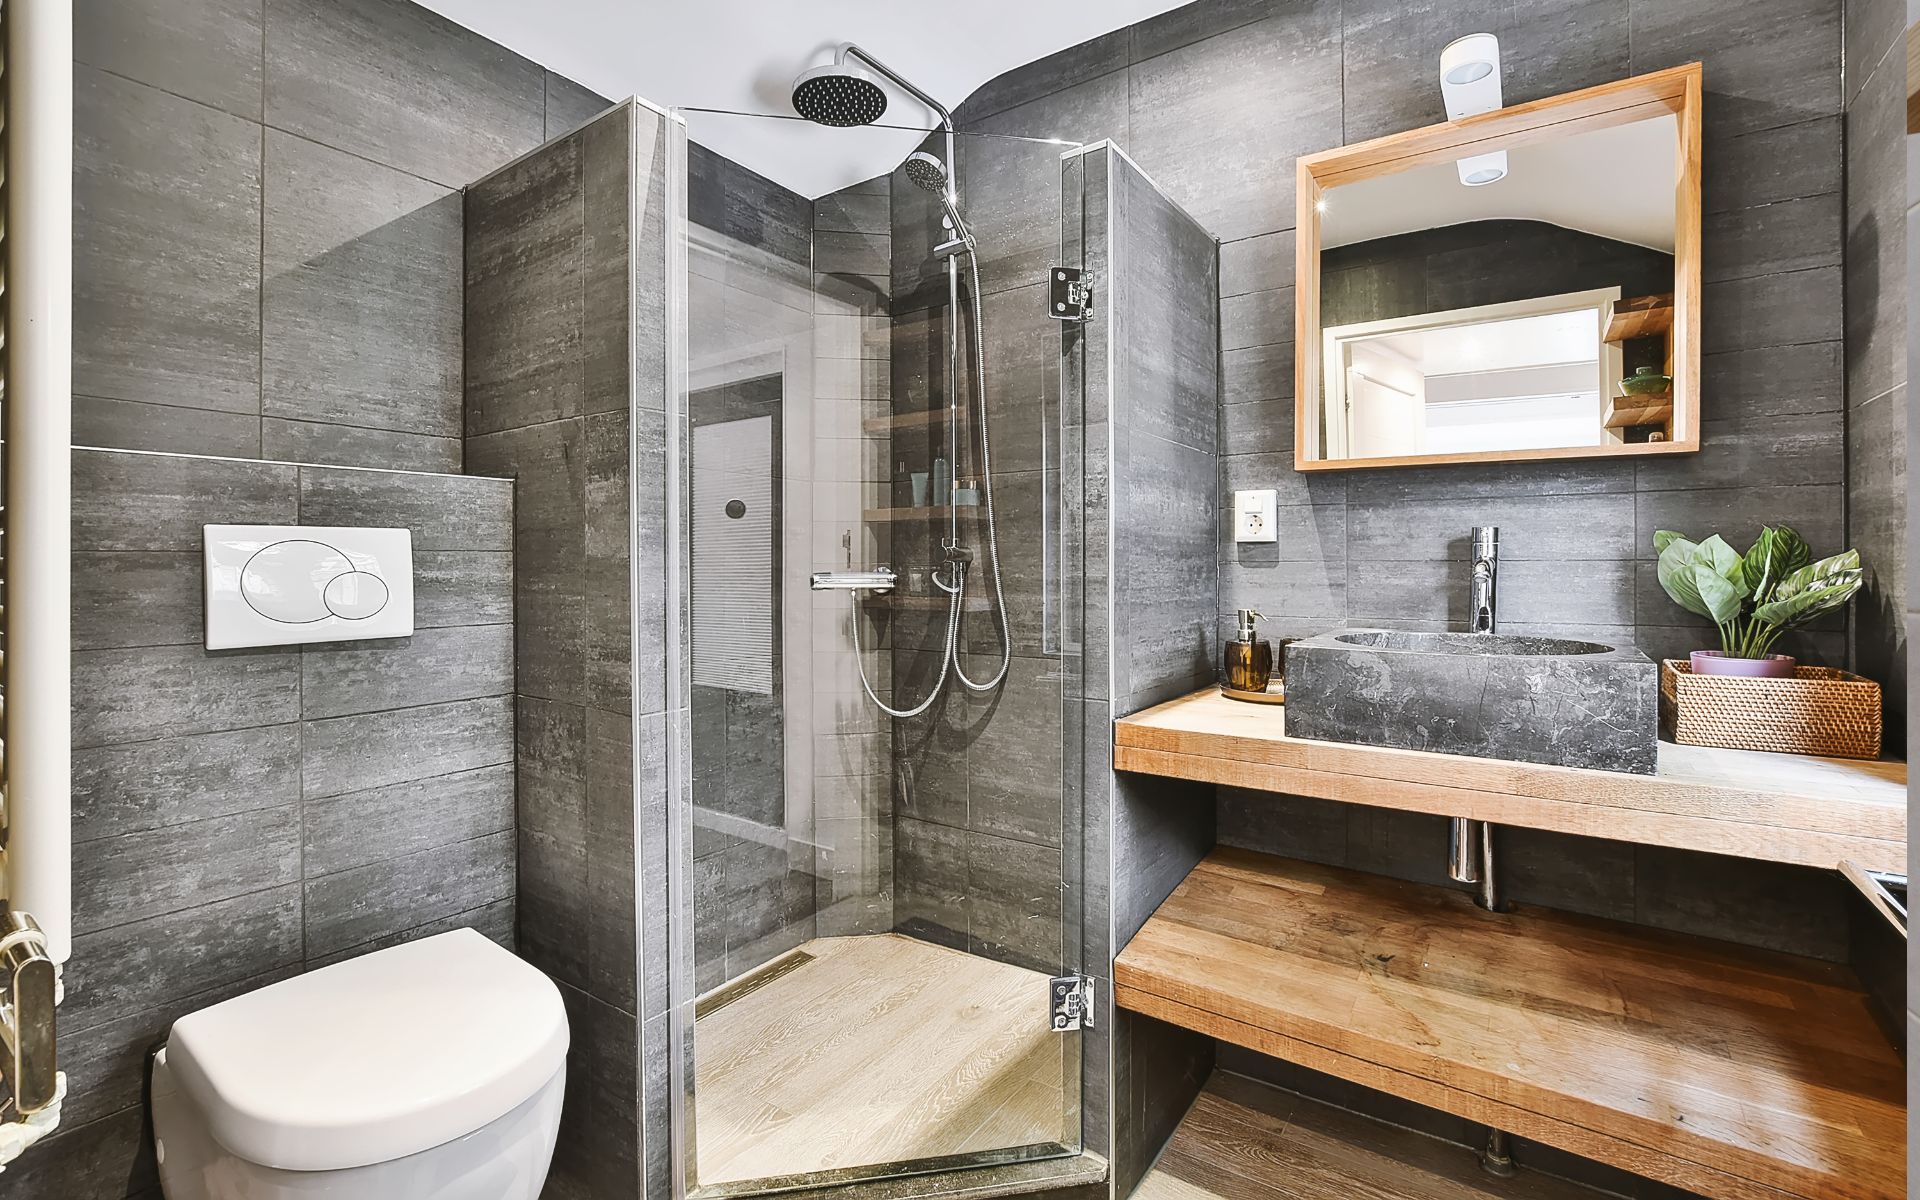 Bathroom with open shelving, shower and toilet